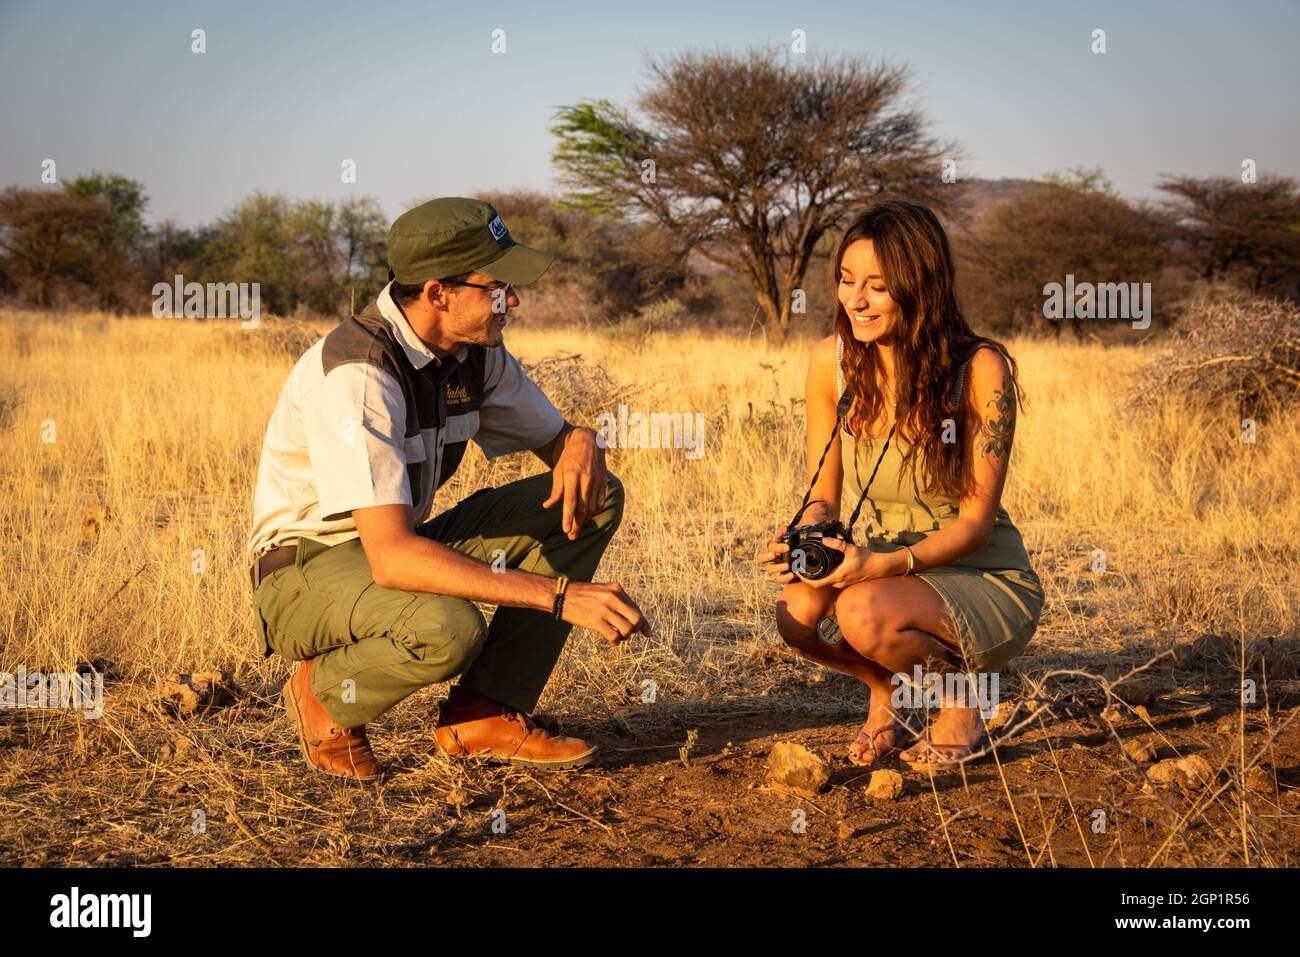 Guide and brunette talk squatting on ground Stock Photo